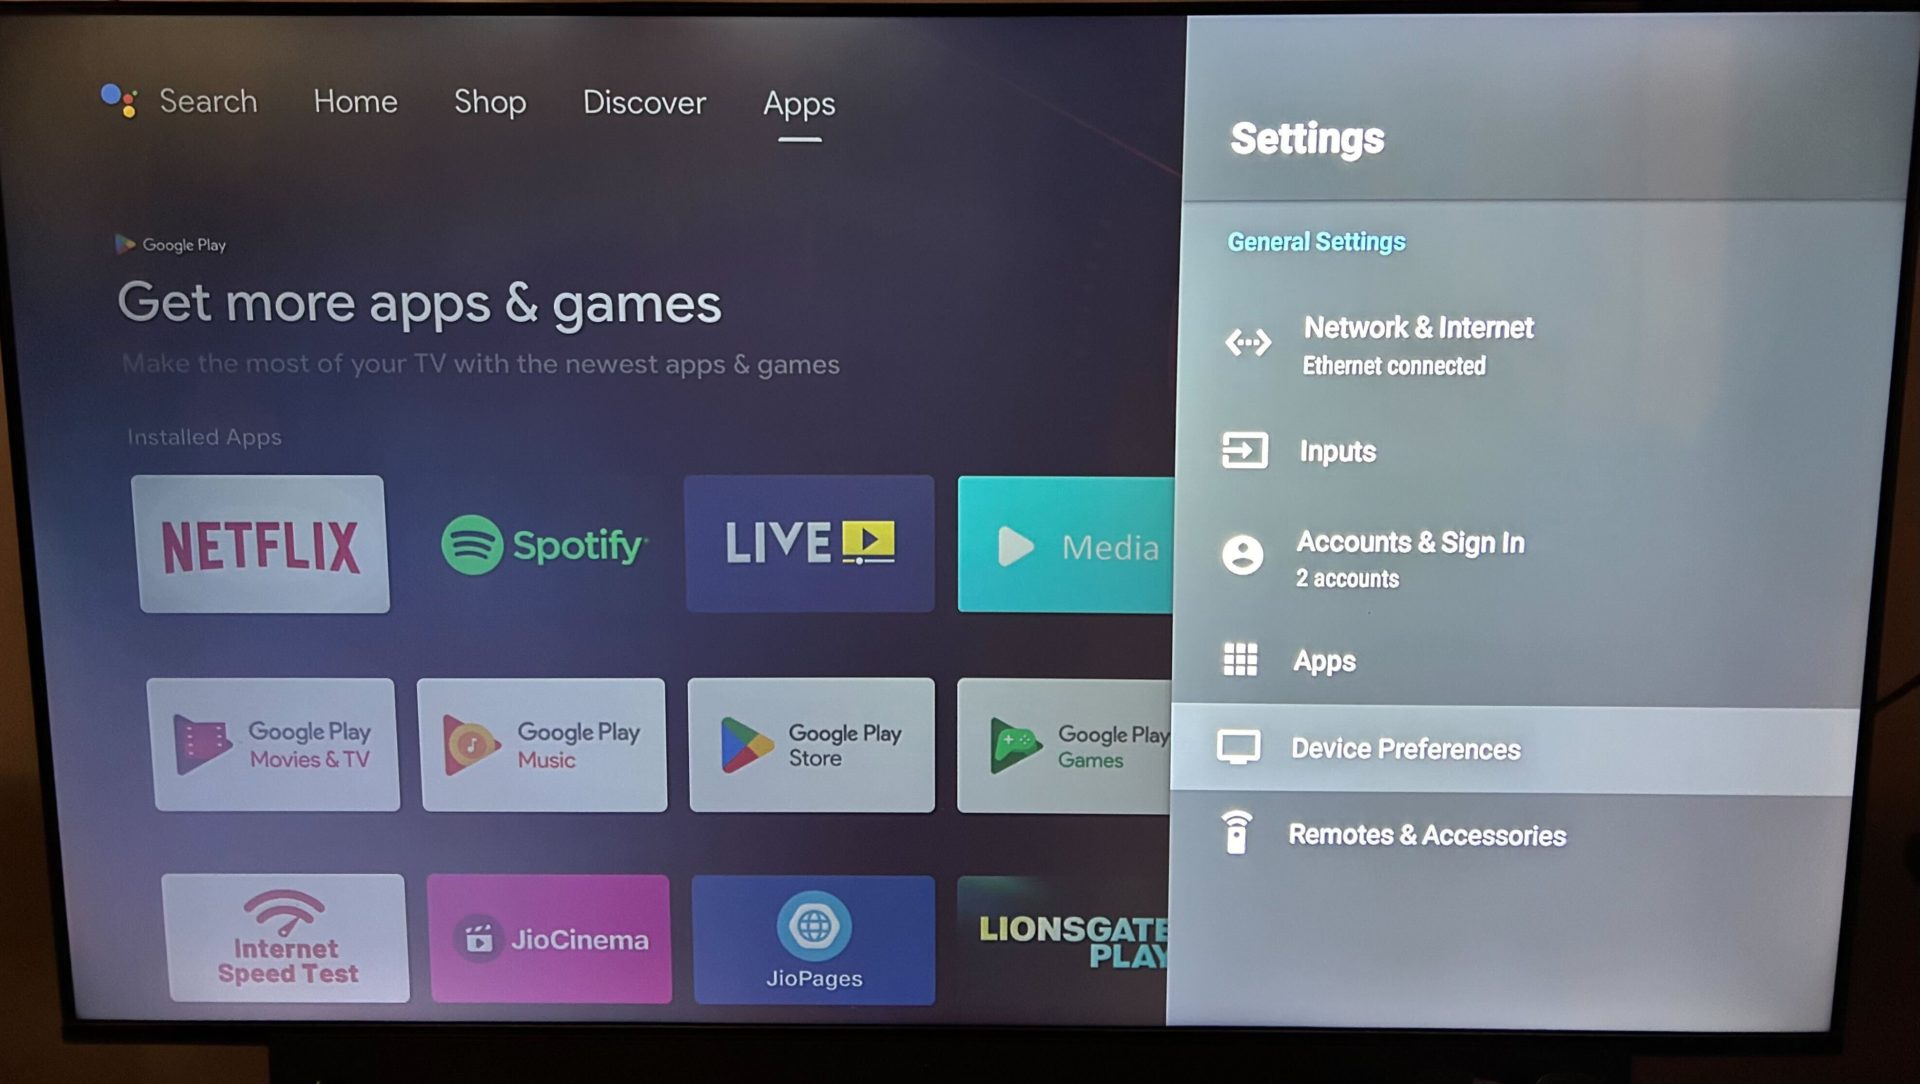 Android TV Device Preferences option